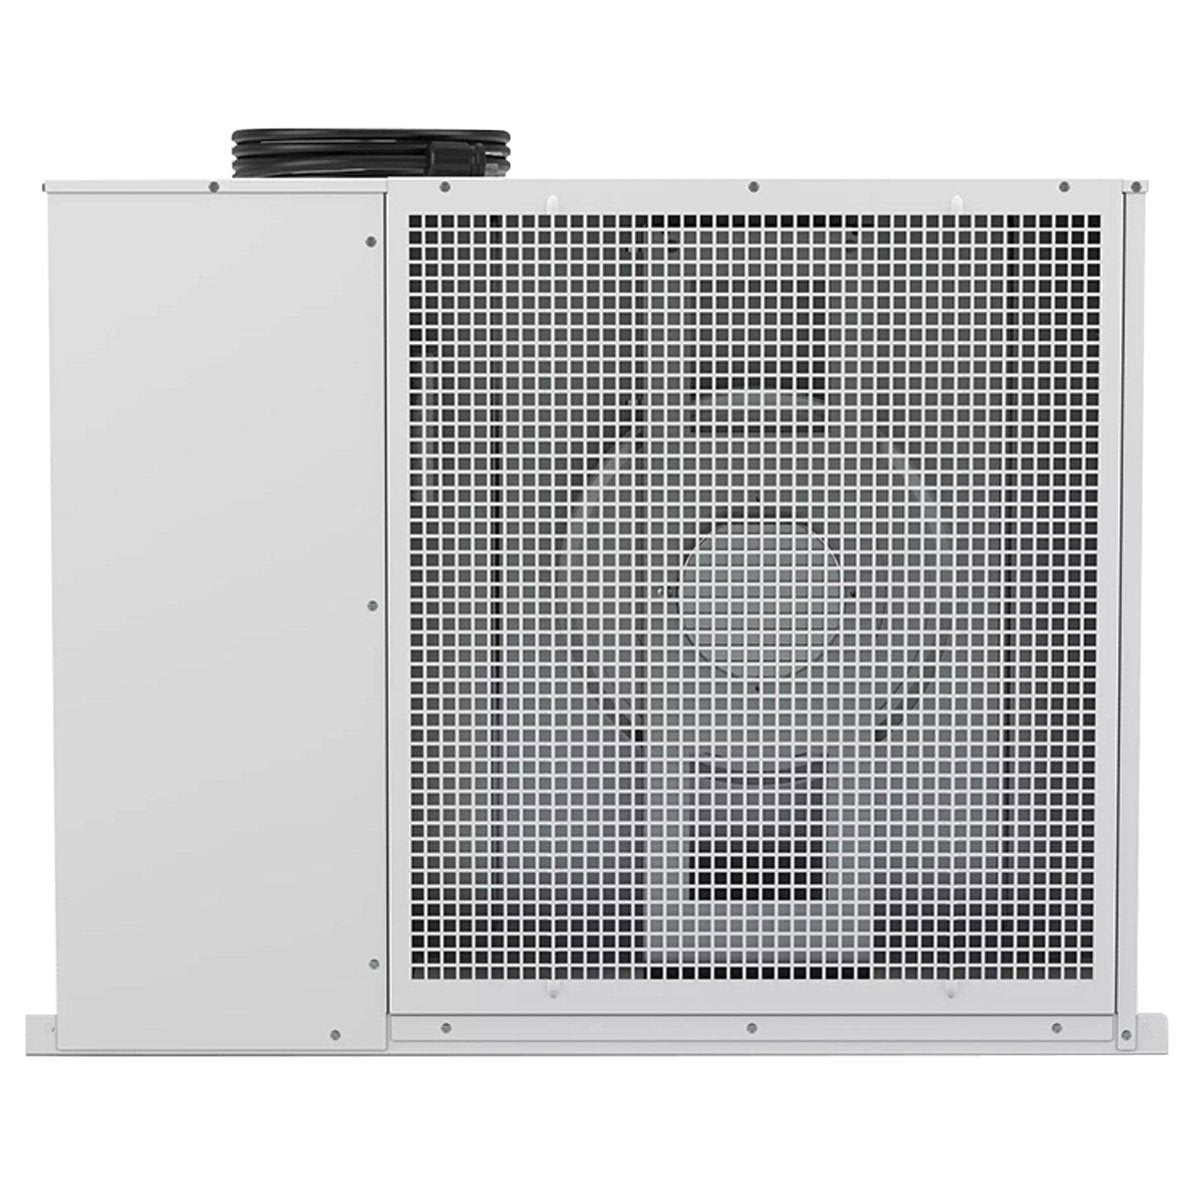 Product Secondary Image:Anden A710 Industrial Dehumidifier 710 Pints / Day 240V